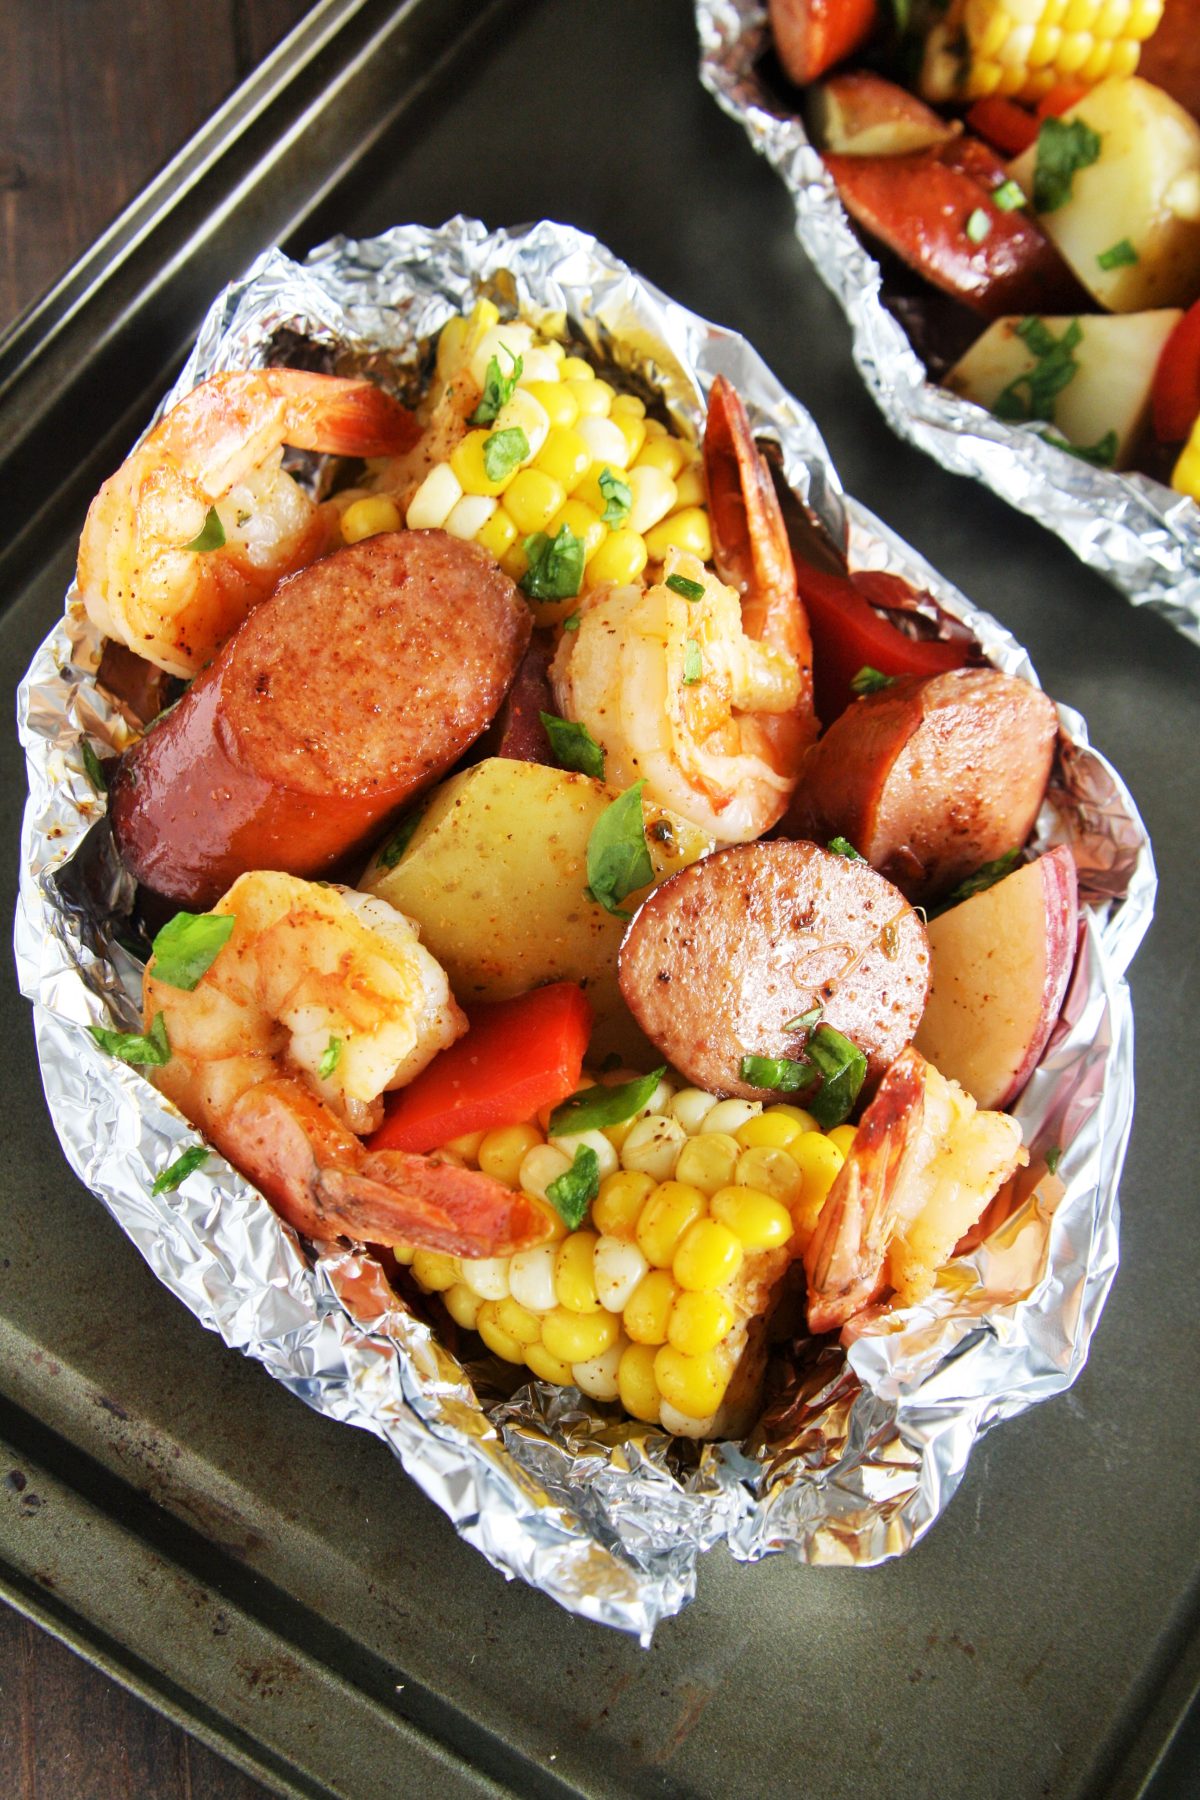 Whether you want an easy weeknight meal at home or looking for a great recipe for the grill, these Cajun Sausage and Shrimp Boil Foil Packets have got you covered. 